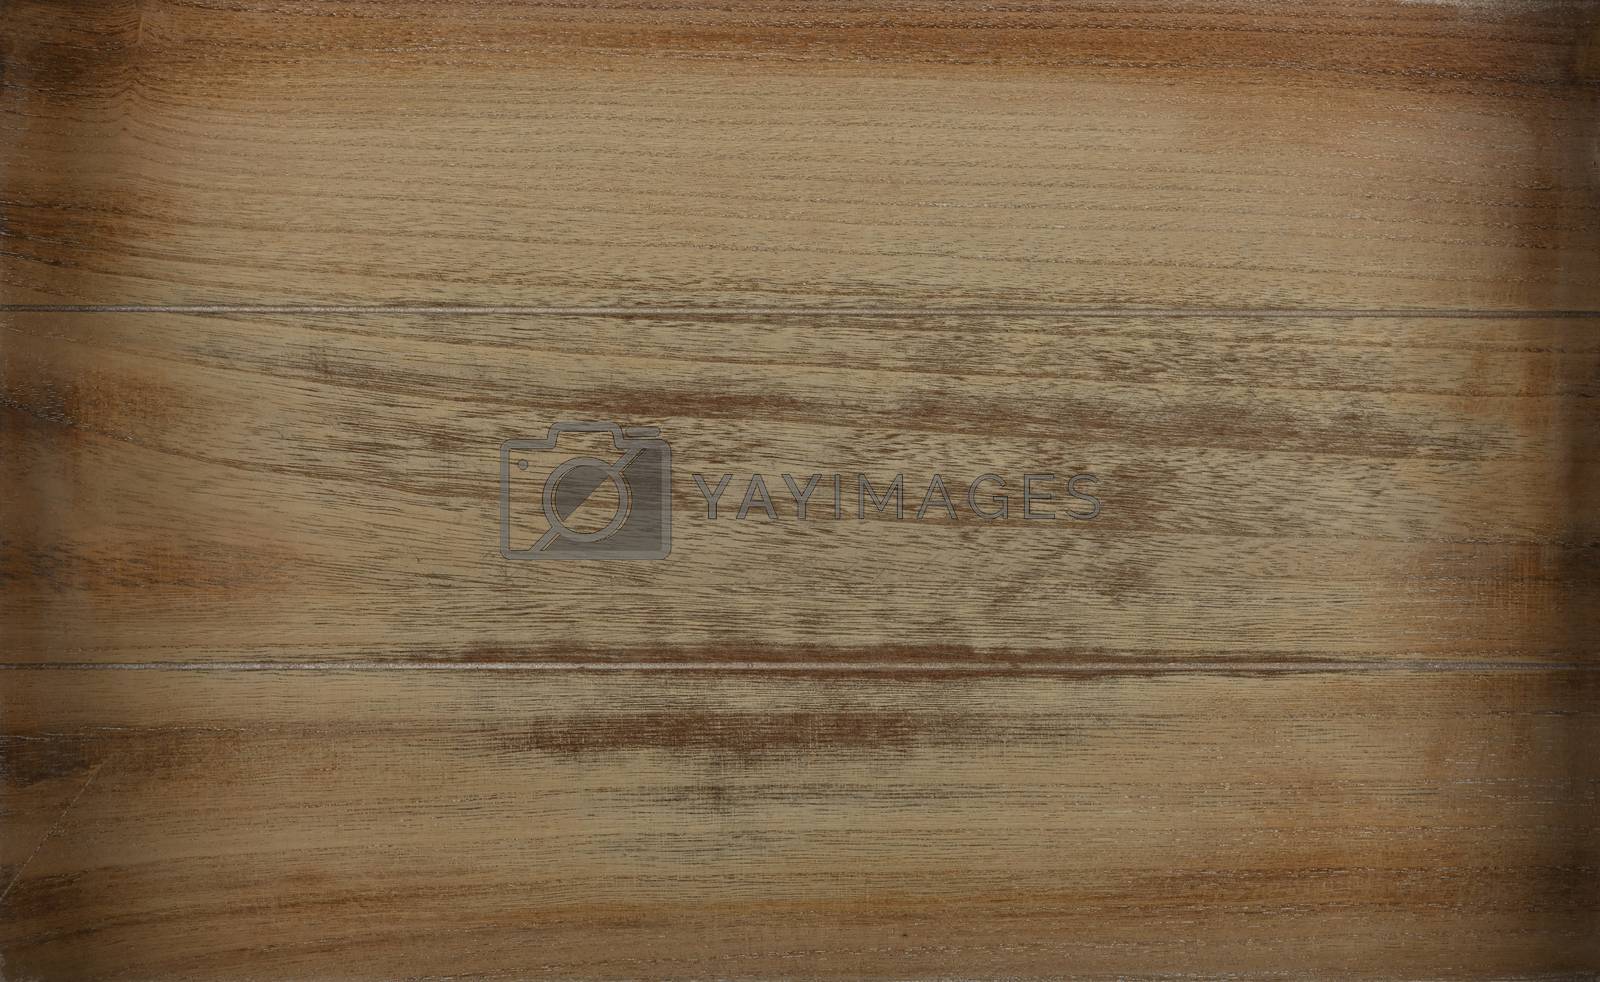 Royalty free image of Grunge brown wooden background texture by BreakingTheWalls